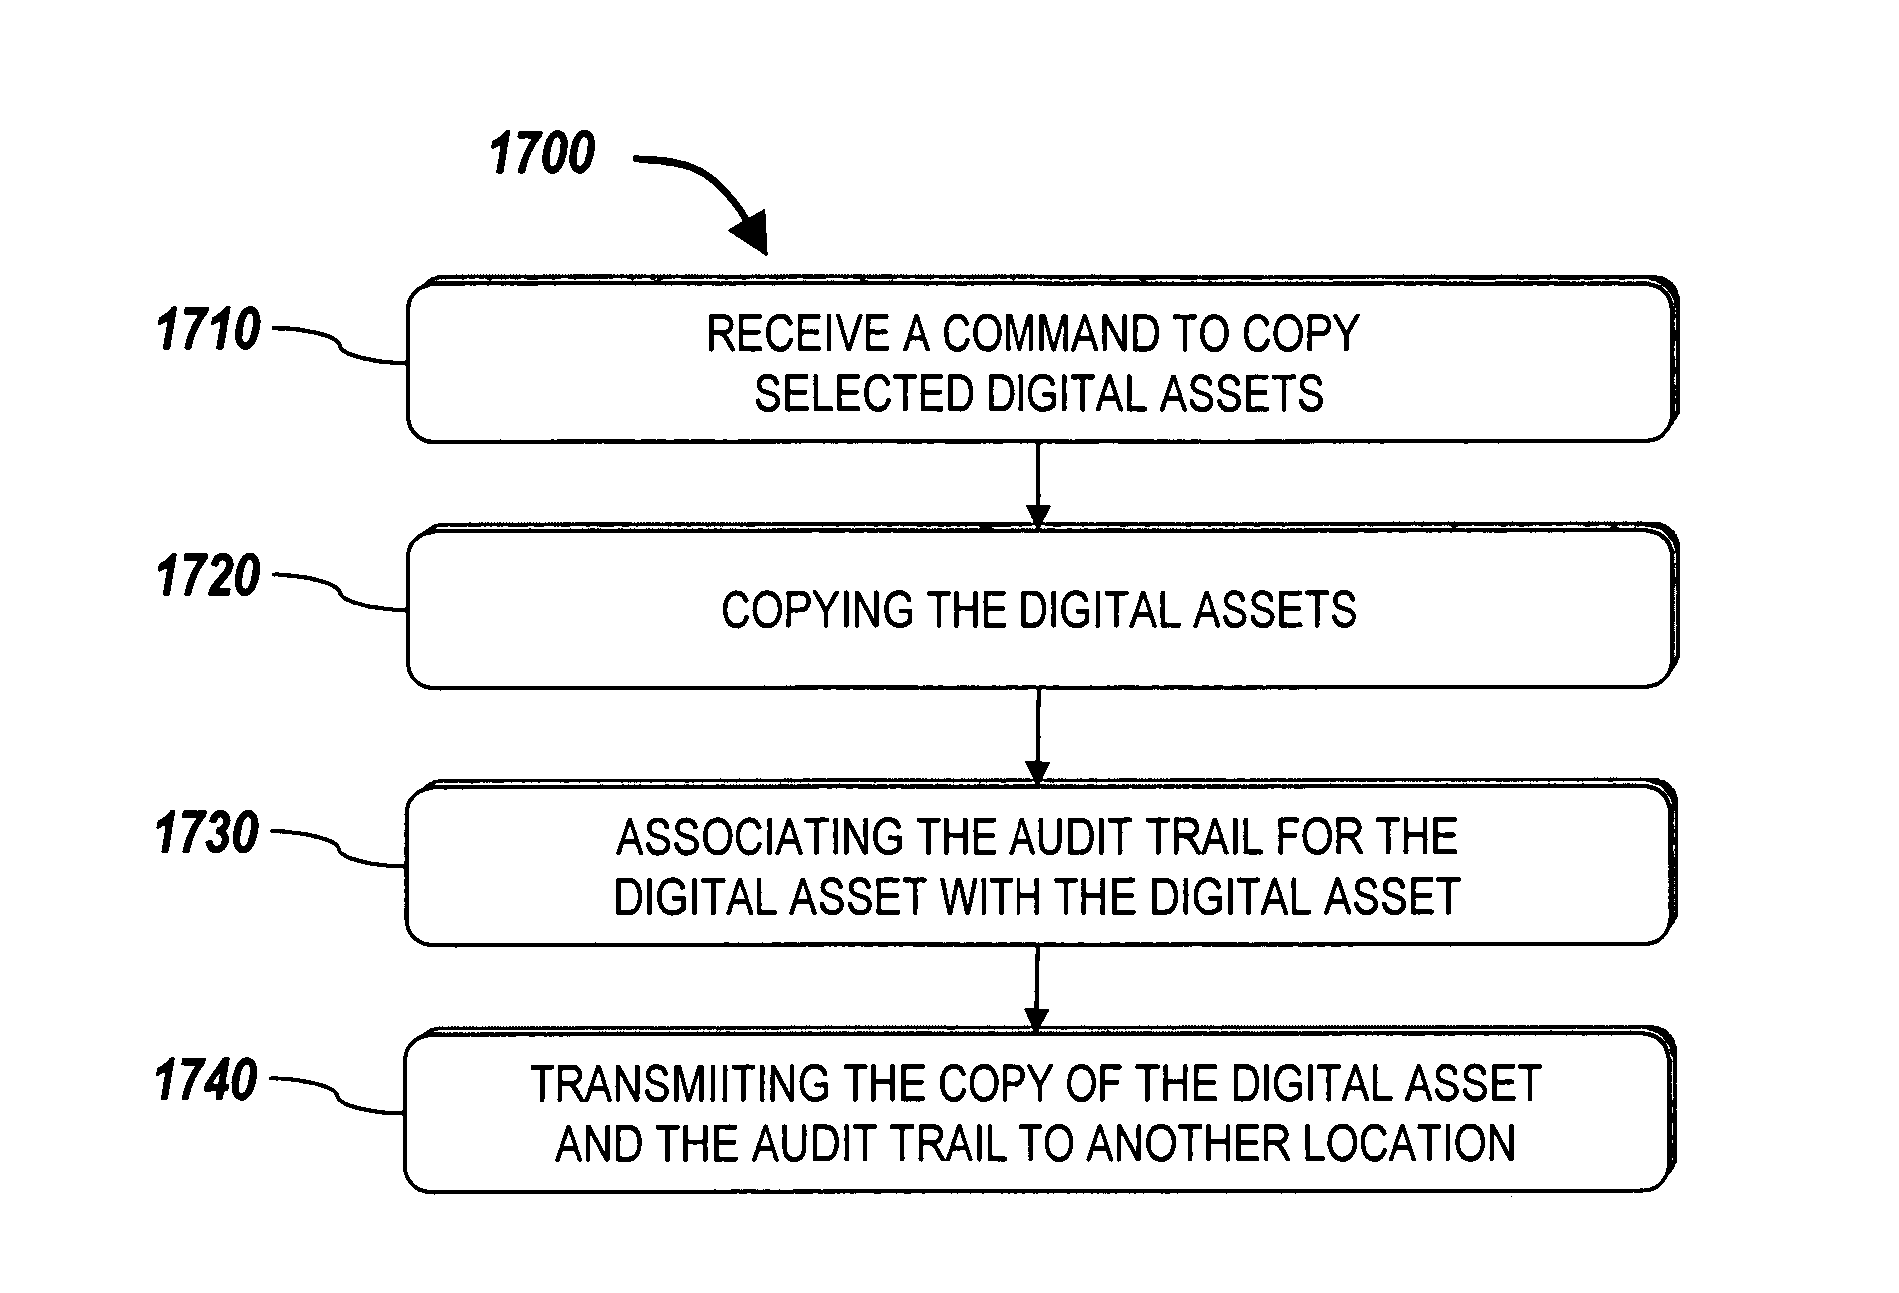 Systems and methods for freezing the state of digital assets for litigation purposes